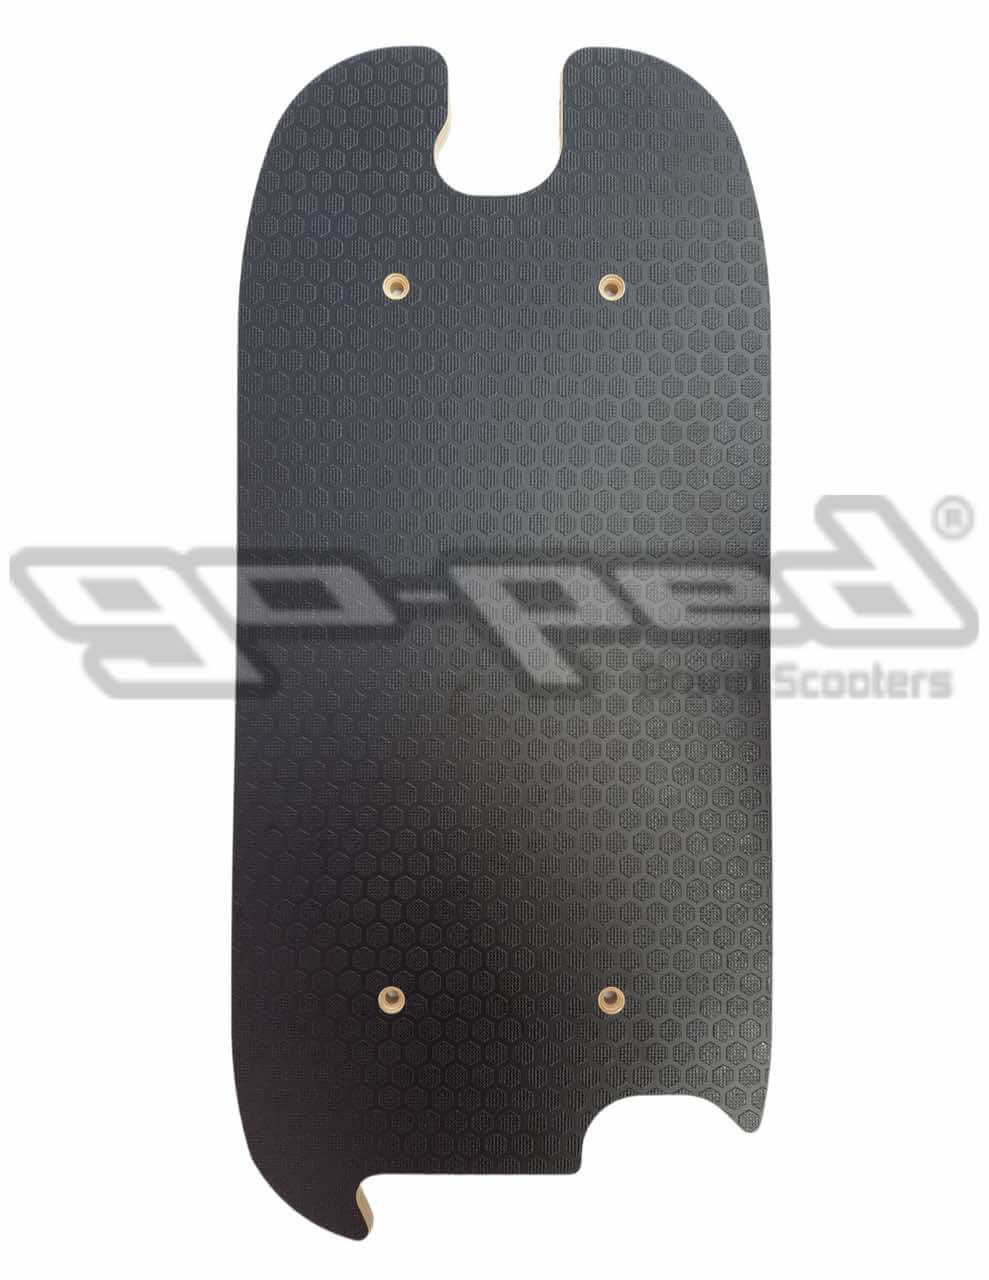 Go-Ped Replacement NEW STYLE FOOT DECK (1006NS) for Sport Gas Scooter